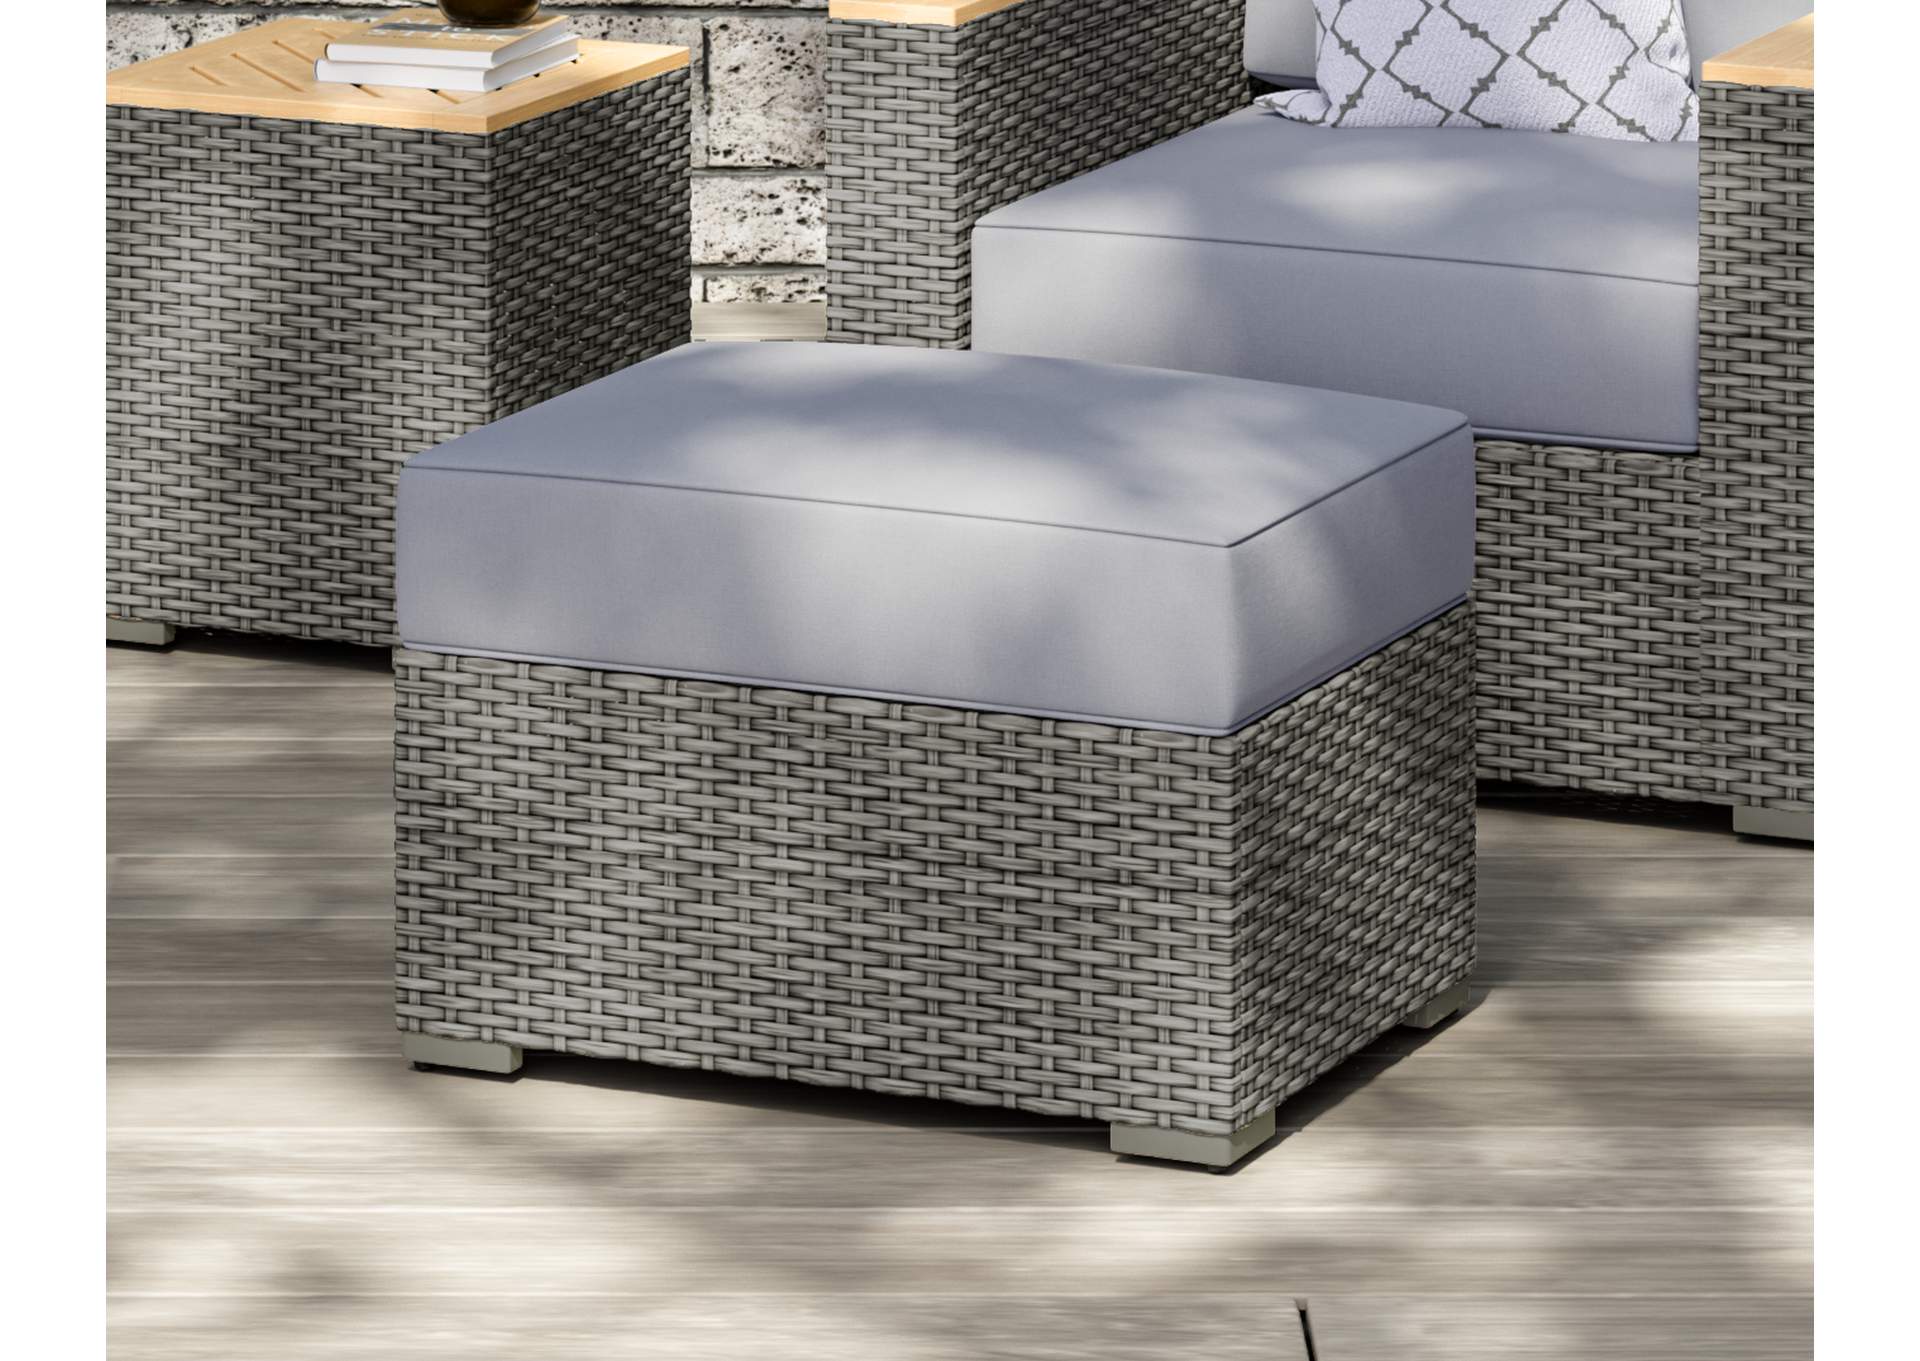 Boca Raton Outdoor Ottoman By Homestyles,Homestyles